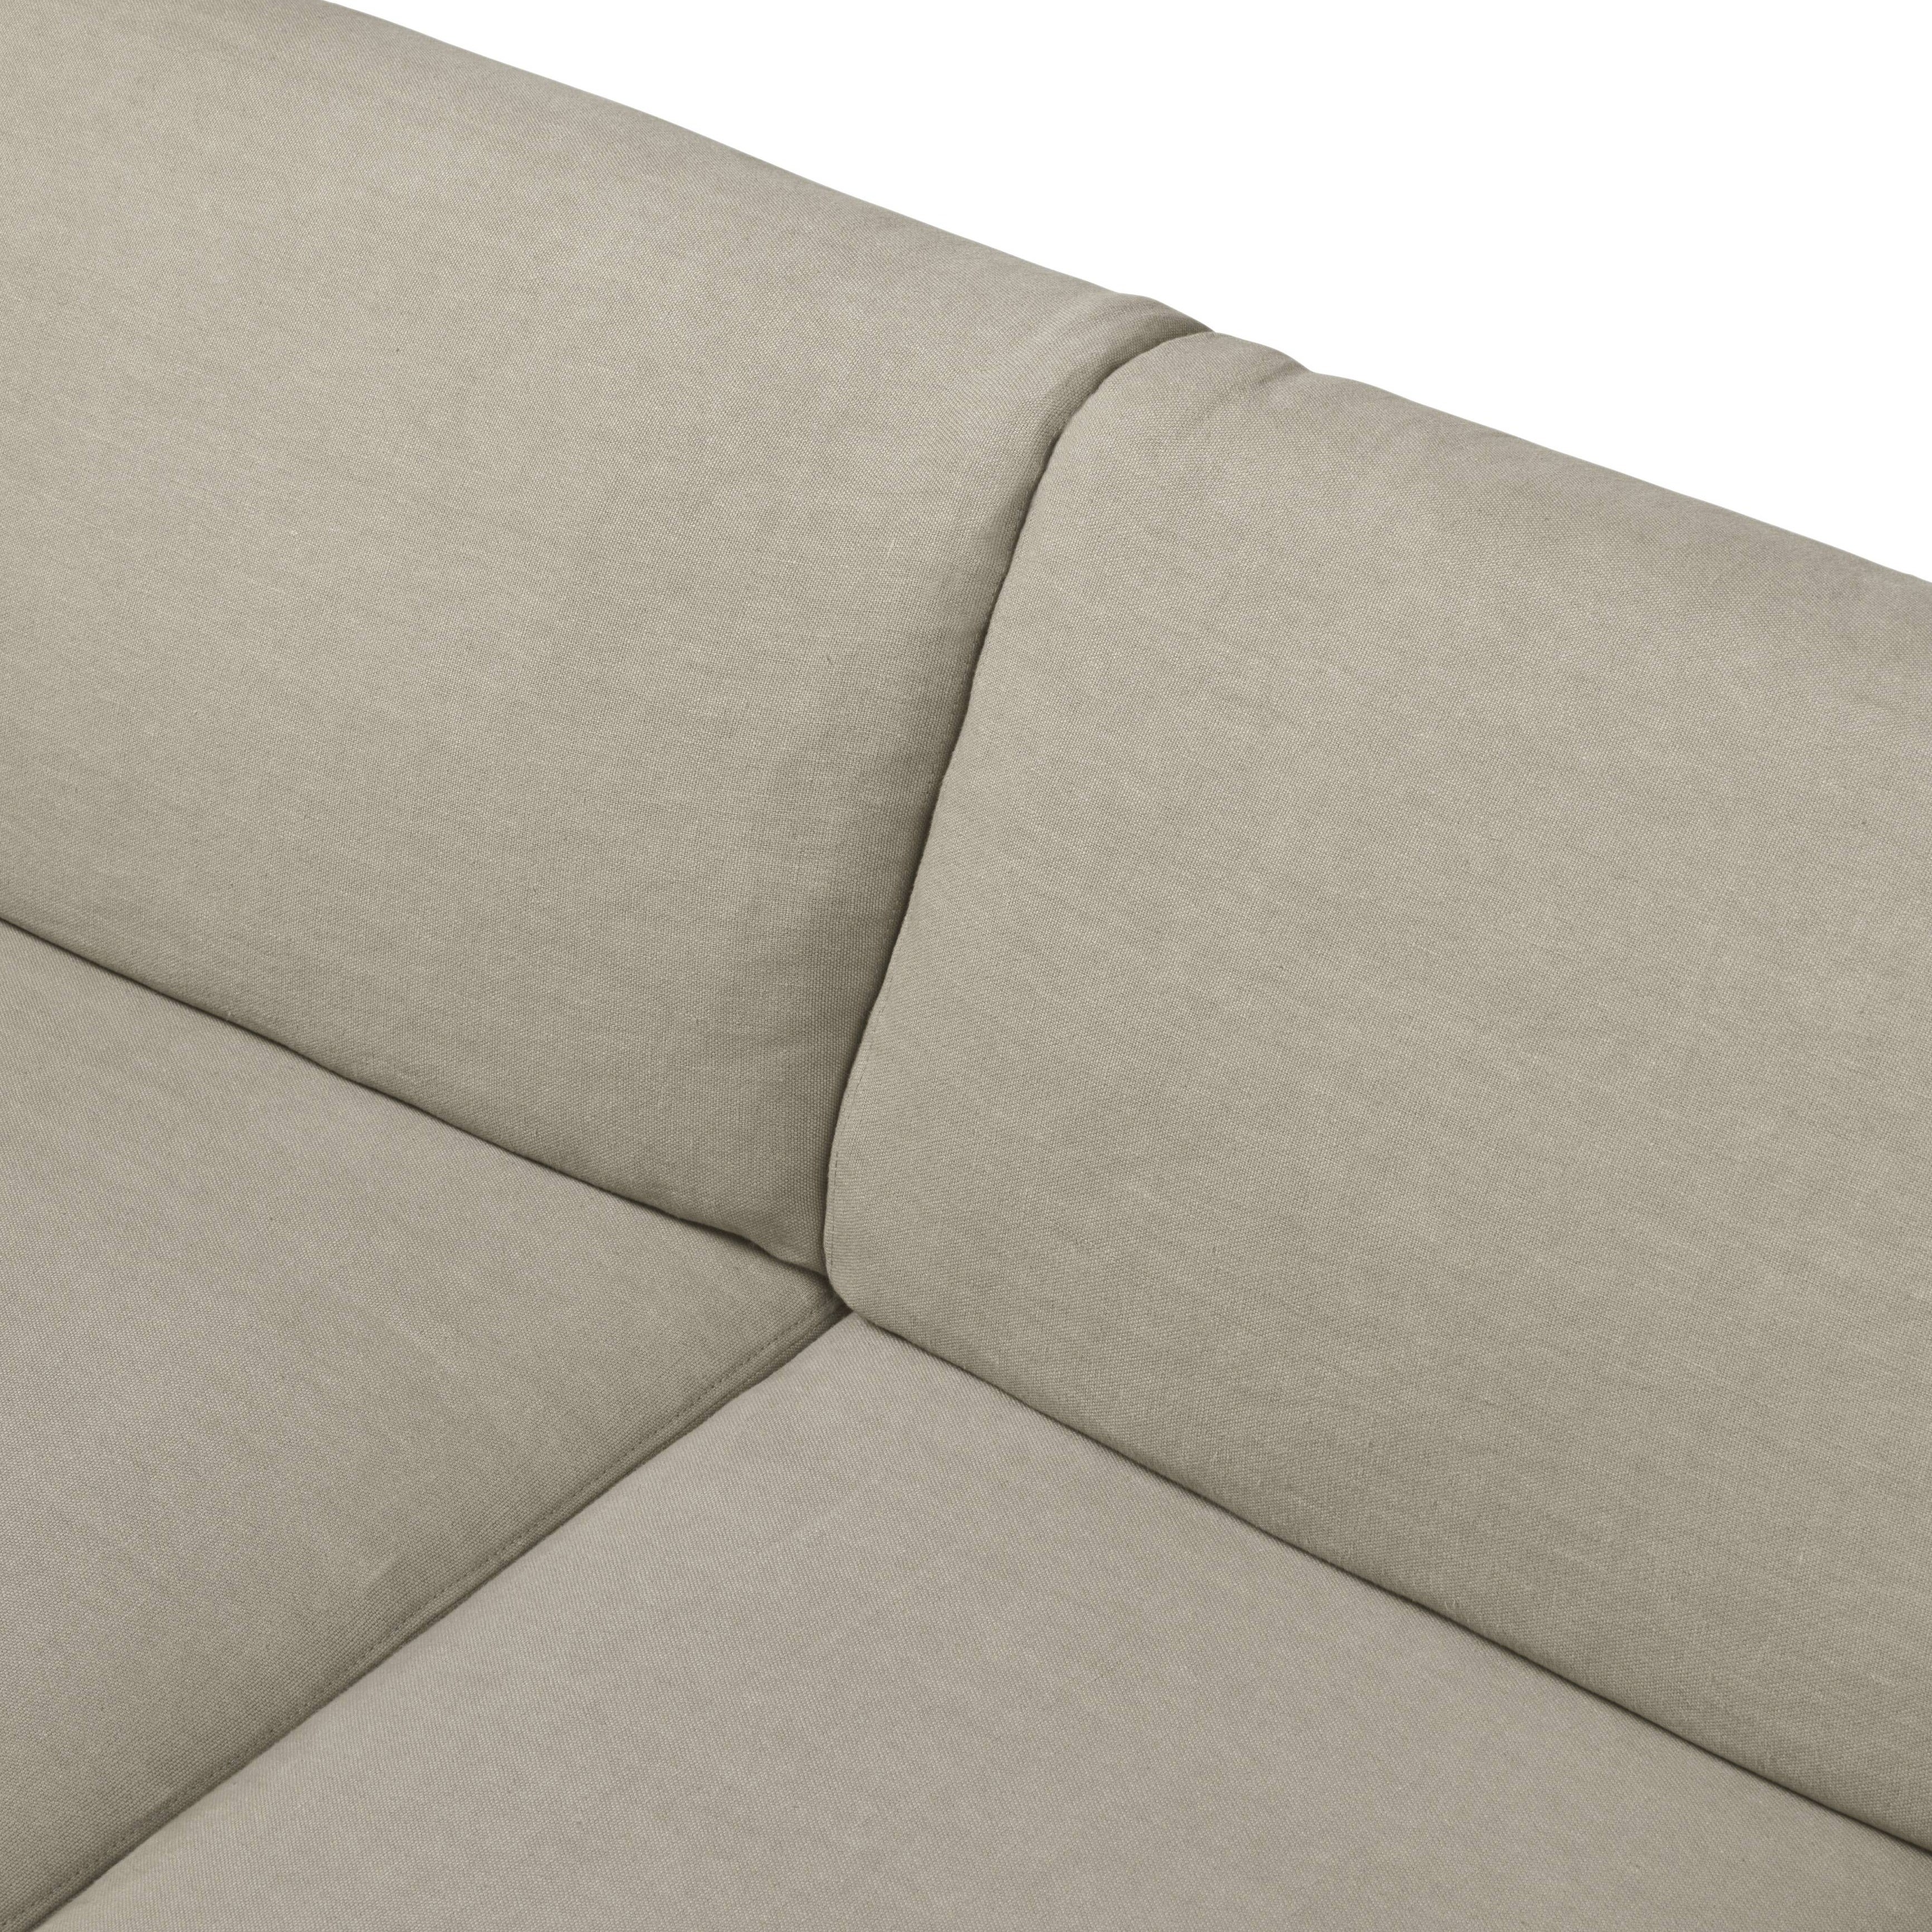 Wonder Sofa: 3 Seater with Chaise Lounge